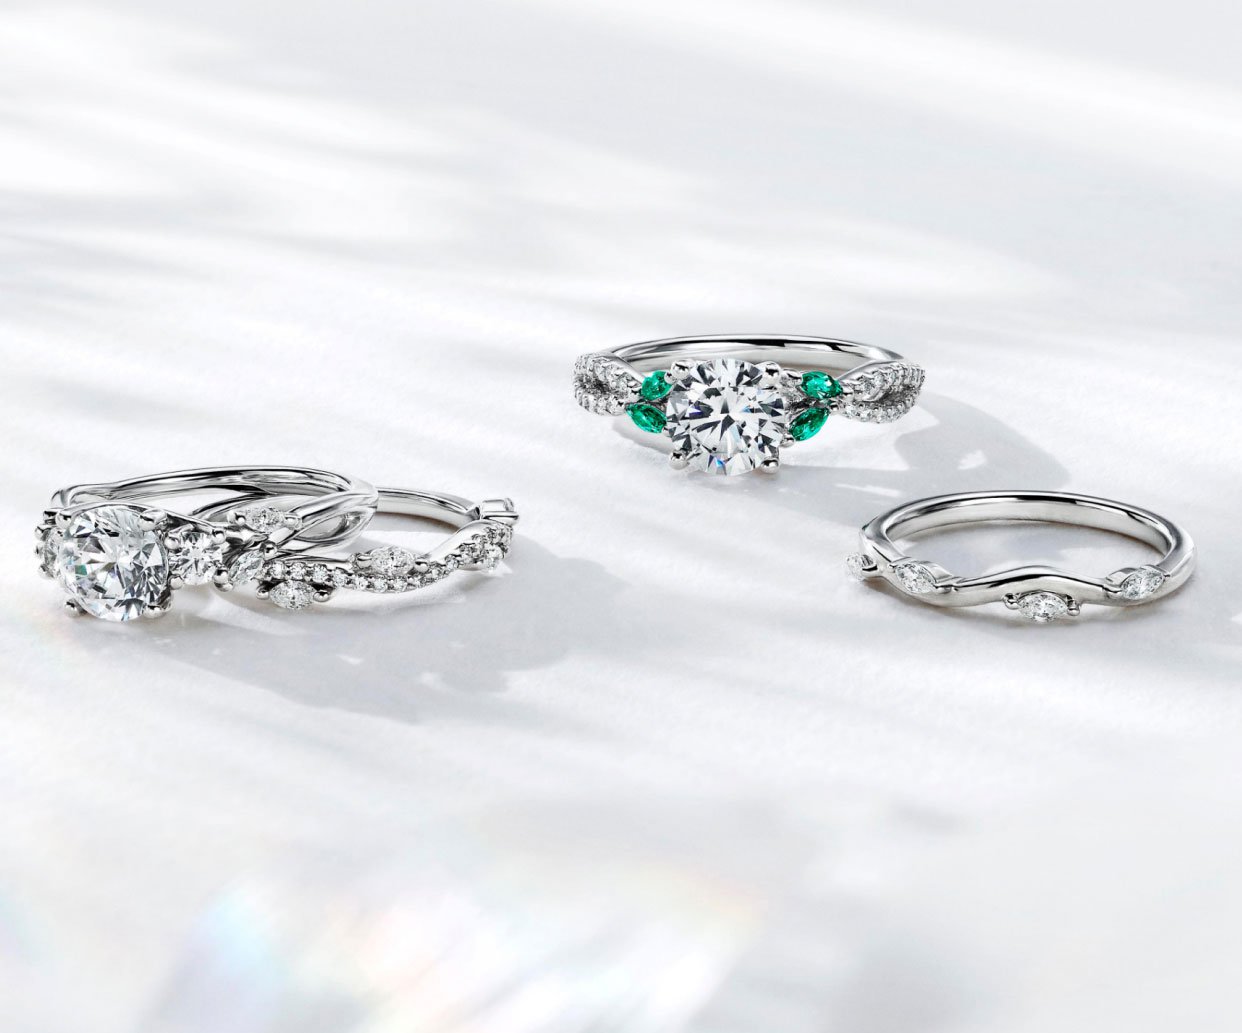 Diamond and gemstone engagement and wedding rings from Brilliant Earth's Willow collection.